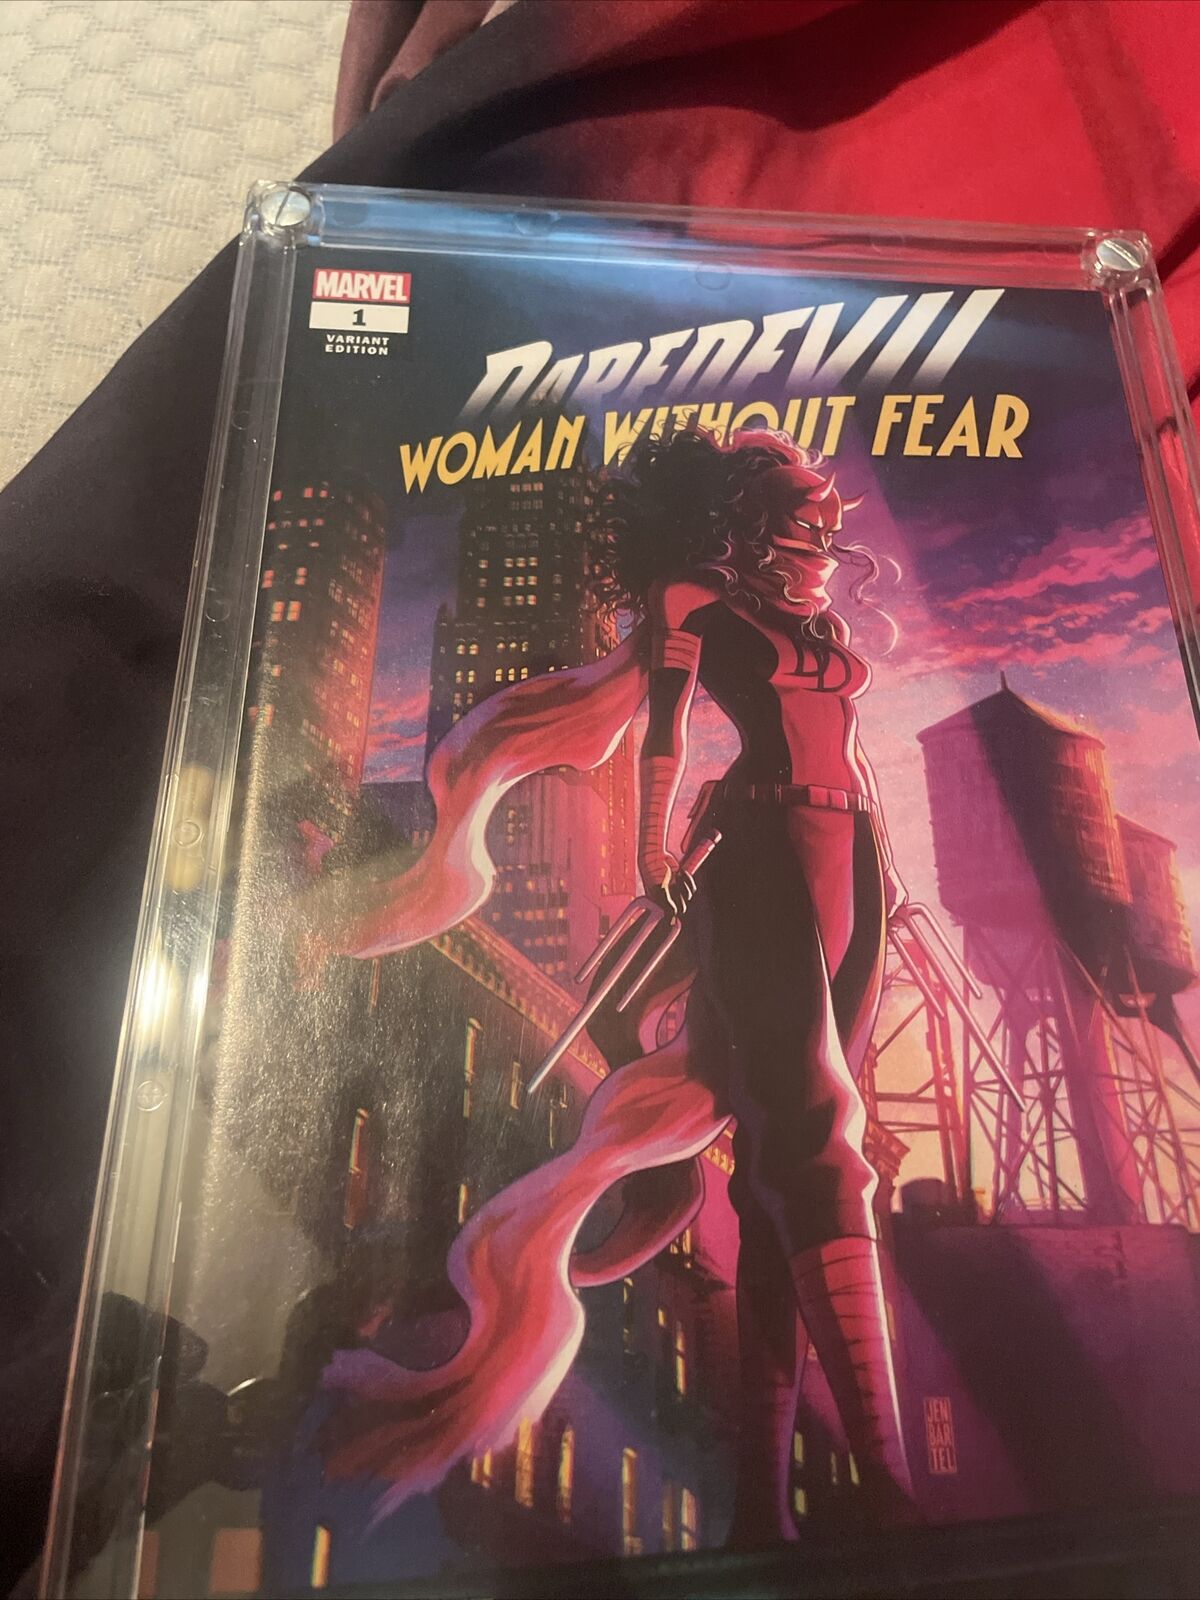 DAREDEVIL WOMAN WITHOUT FEAR #1 Jen Bartel 1:50 Variant NM